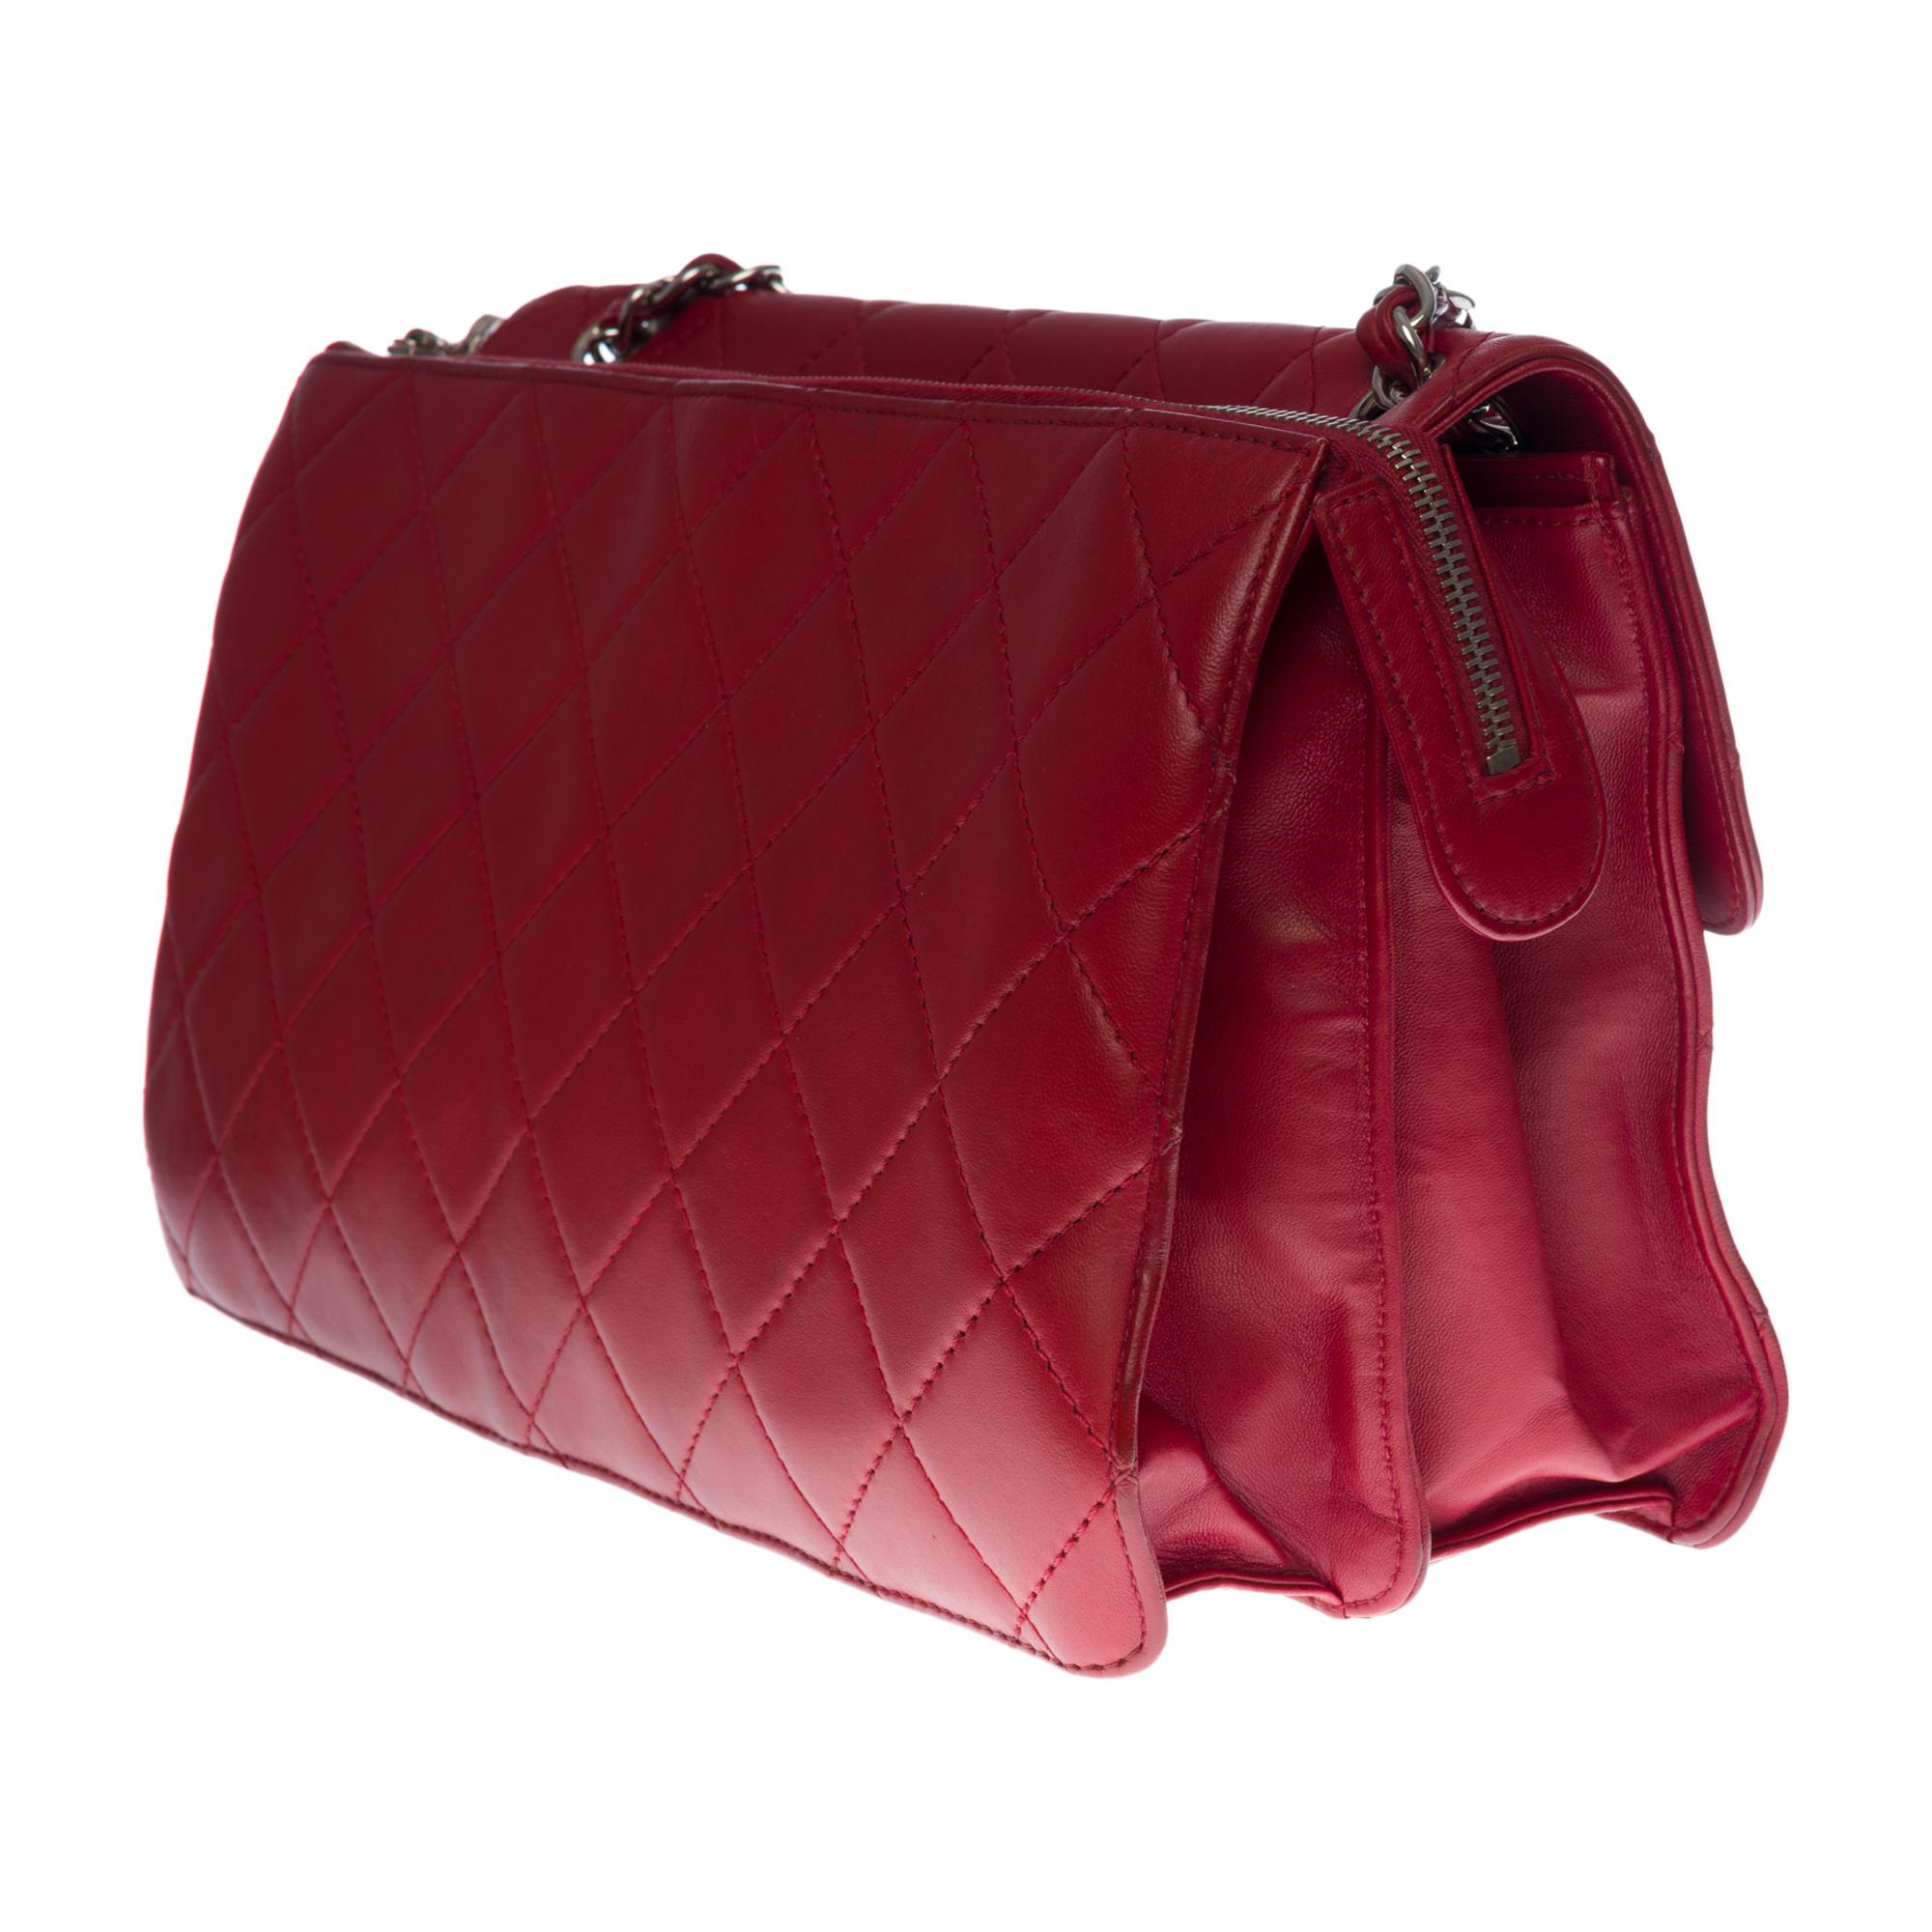 Women's Chanel Classic 2.55 Maxi shoulder bag in red quilted leather, SHW For Sale